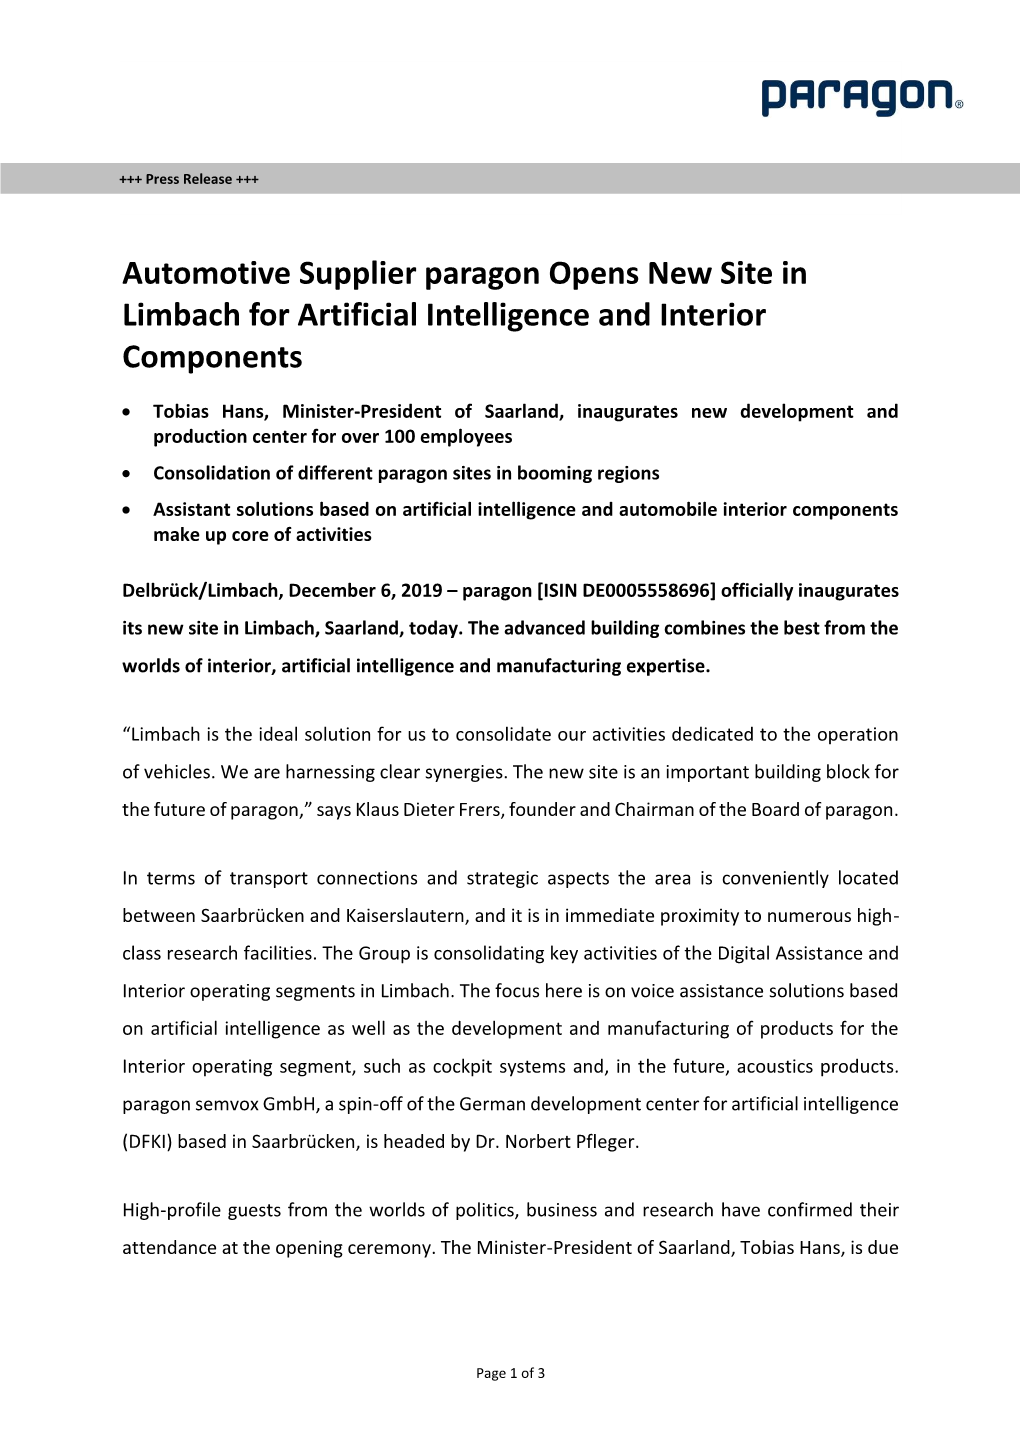 Automotive Supplier Paragon Opens New Site in Limbach for Artificial Intelligence and Interior Components